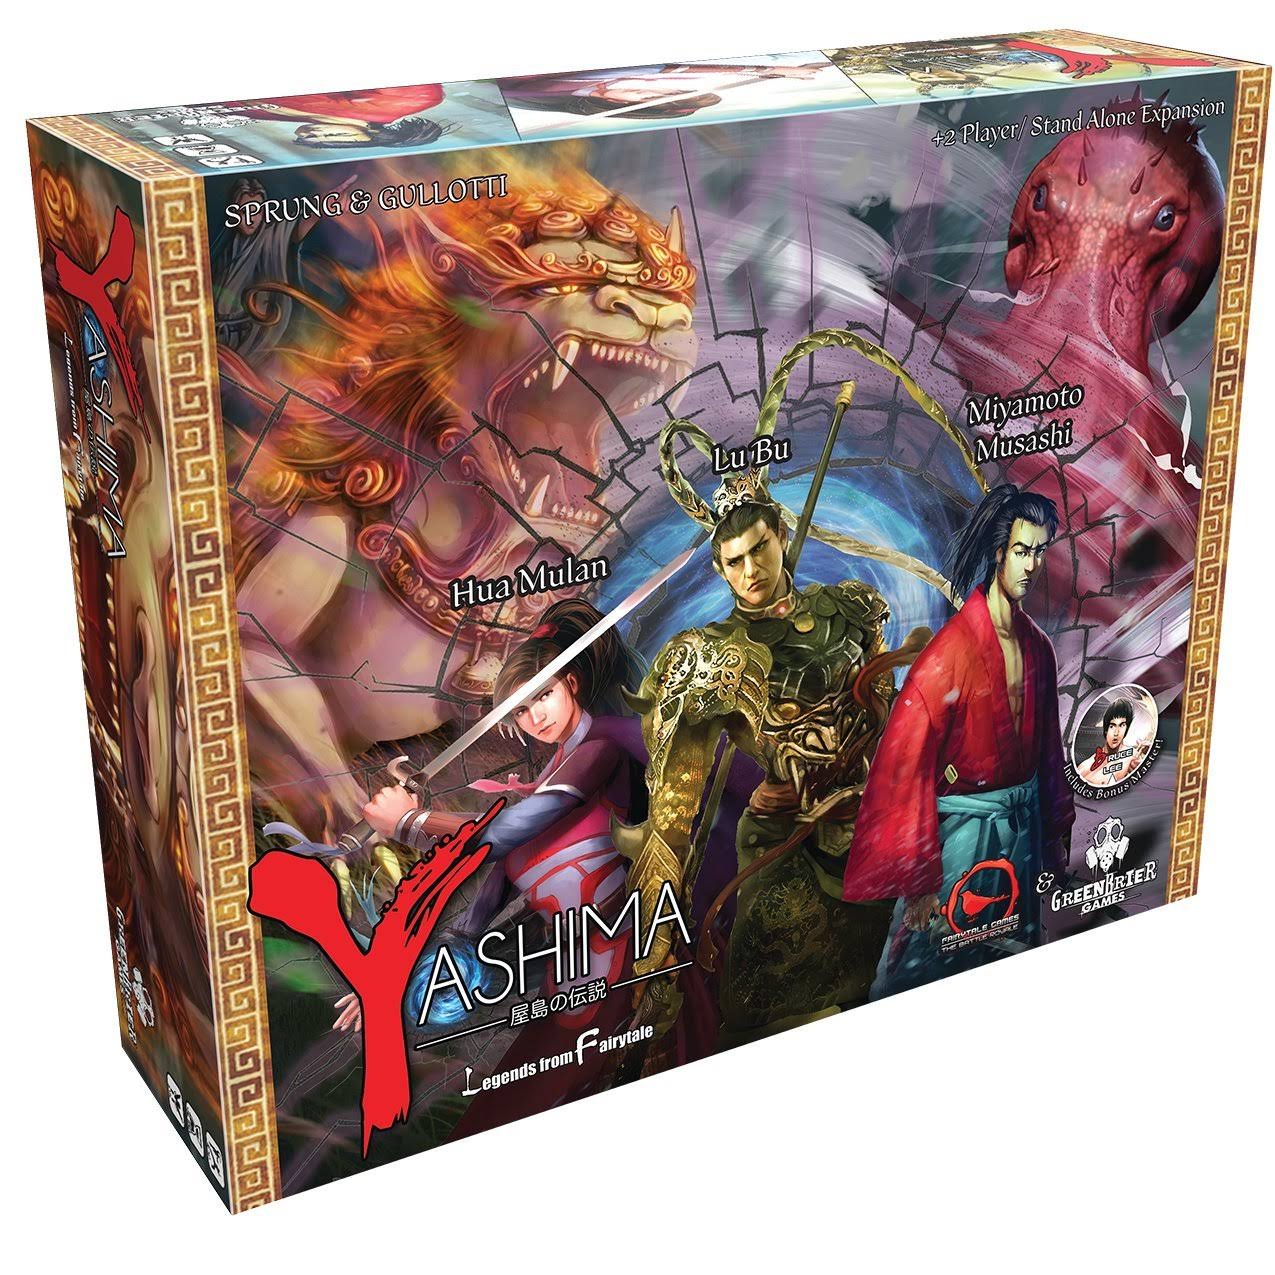 yashima legends from fairy tale board game